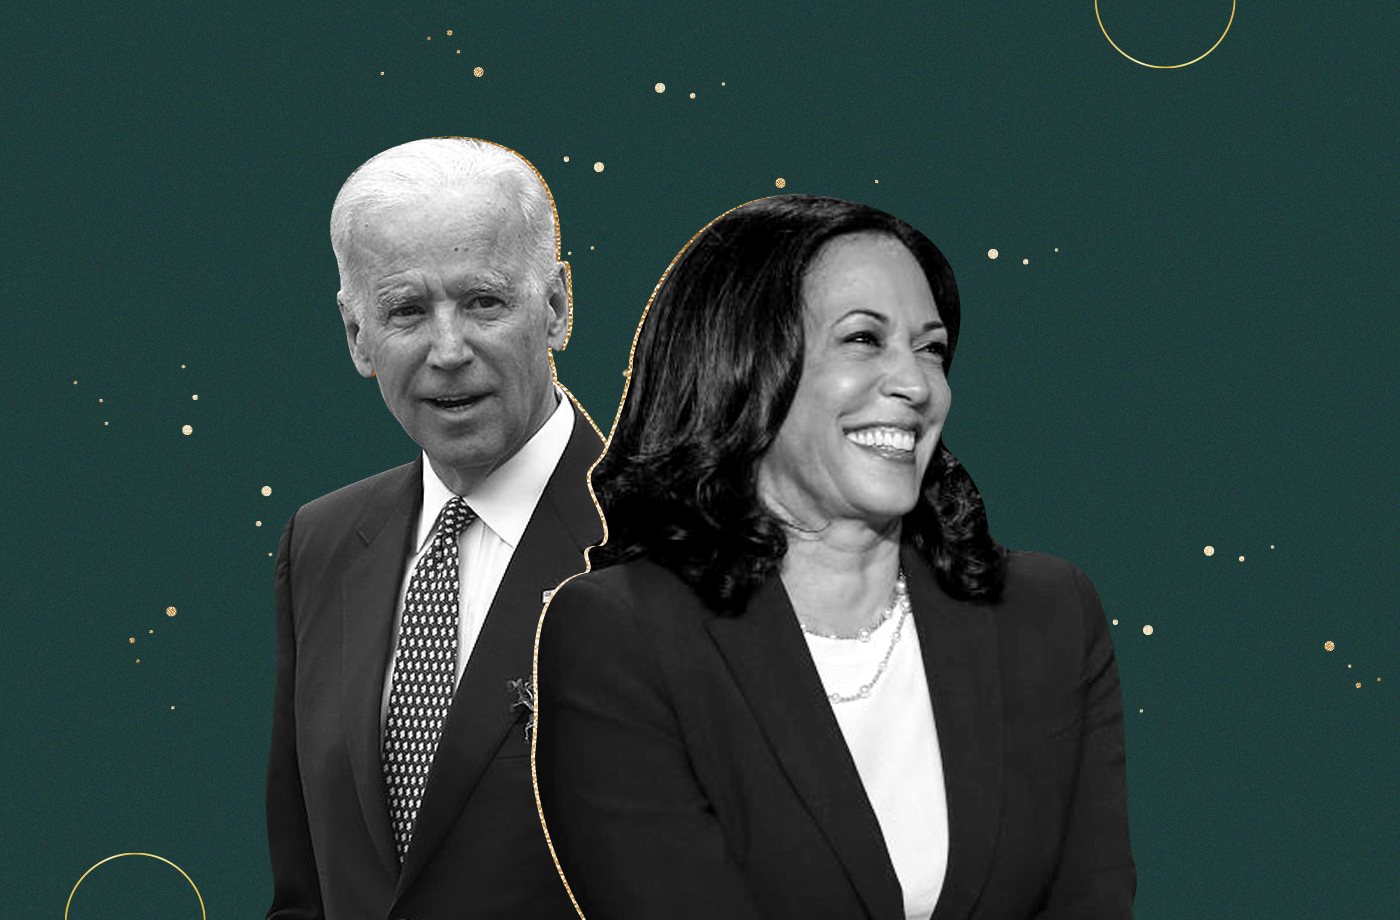 astrological compatibility of Harris and Biden